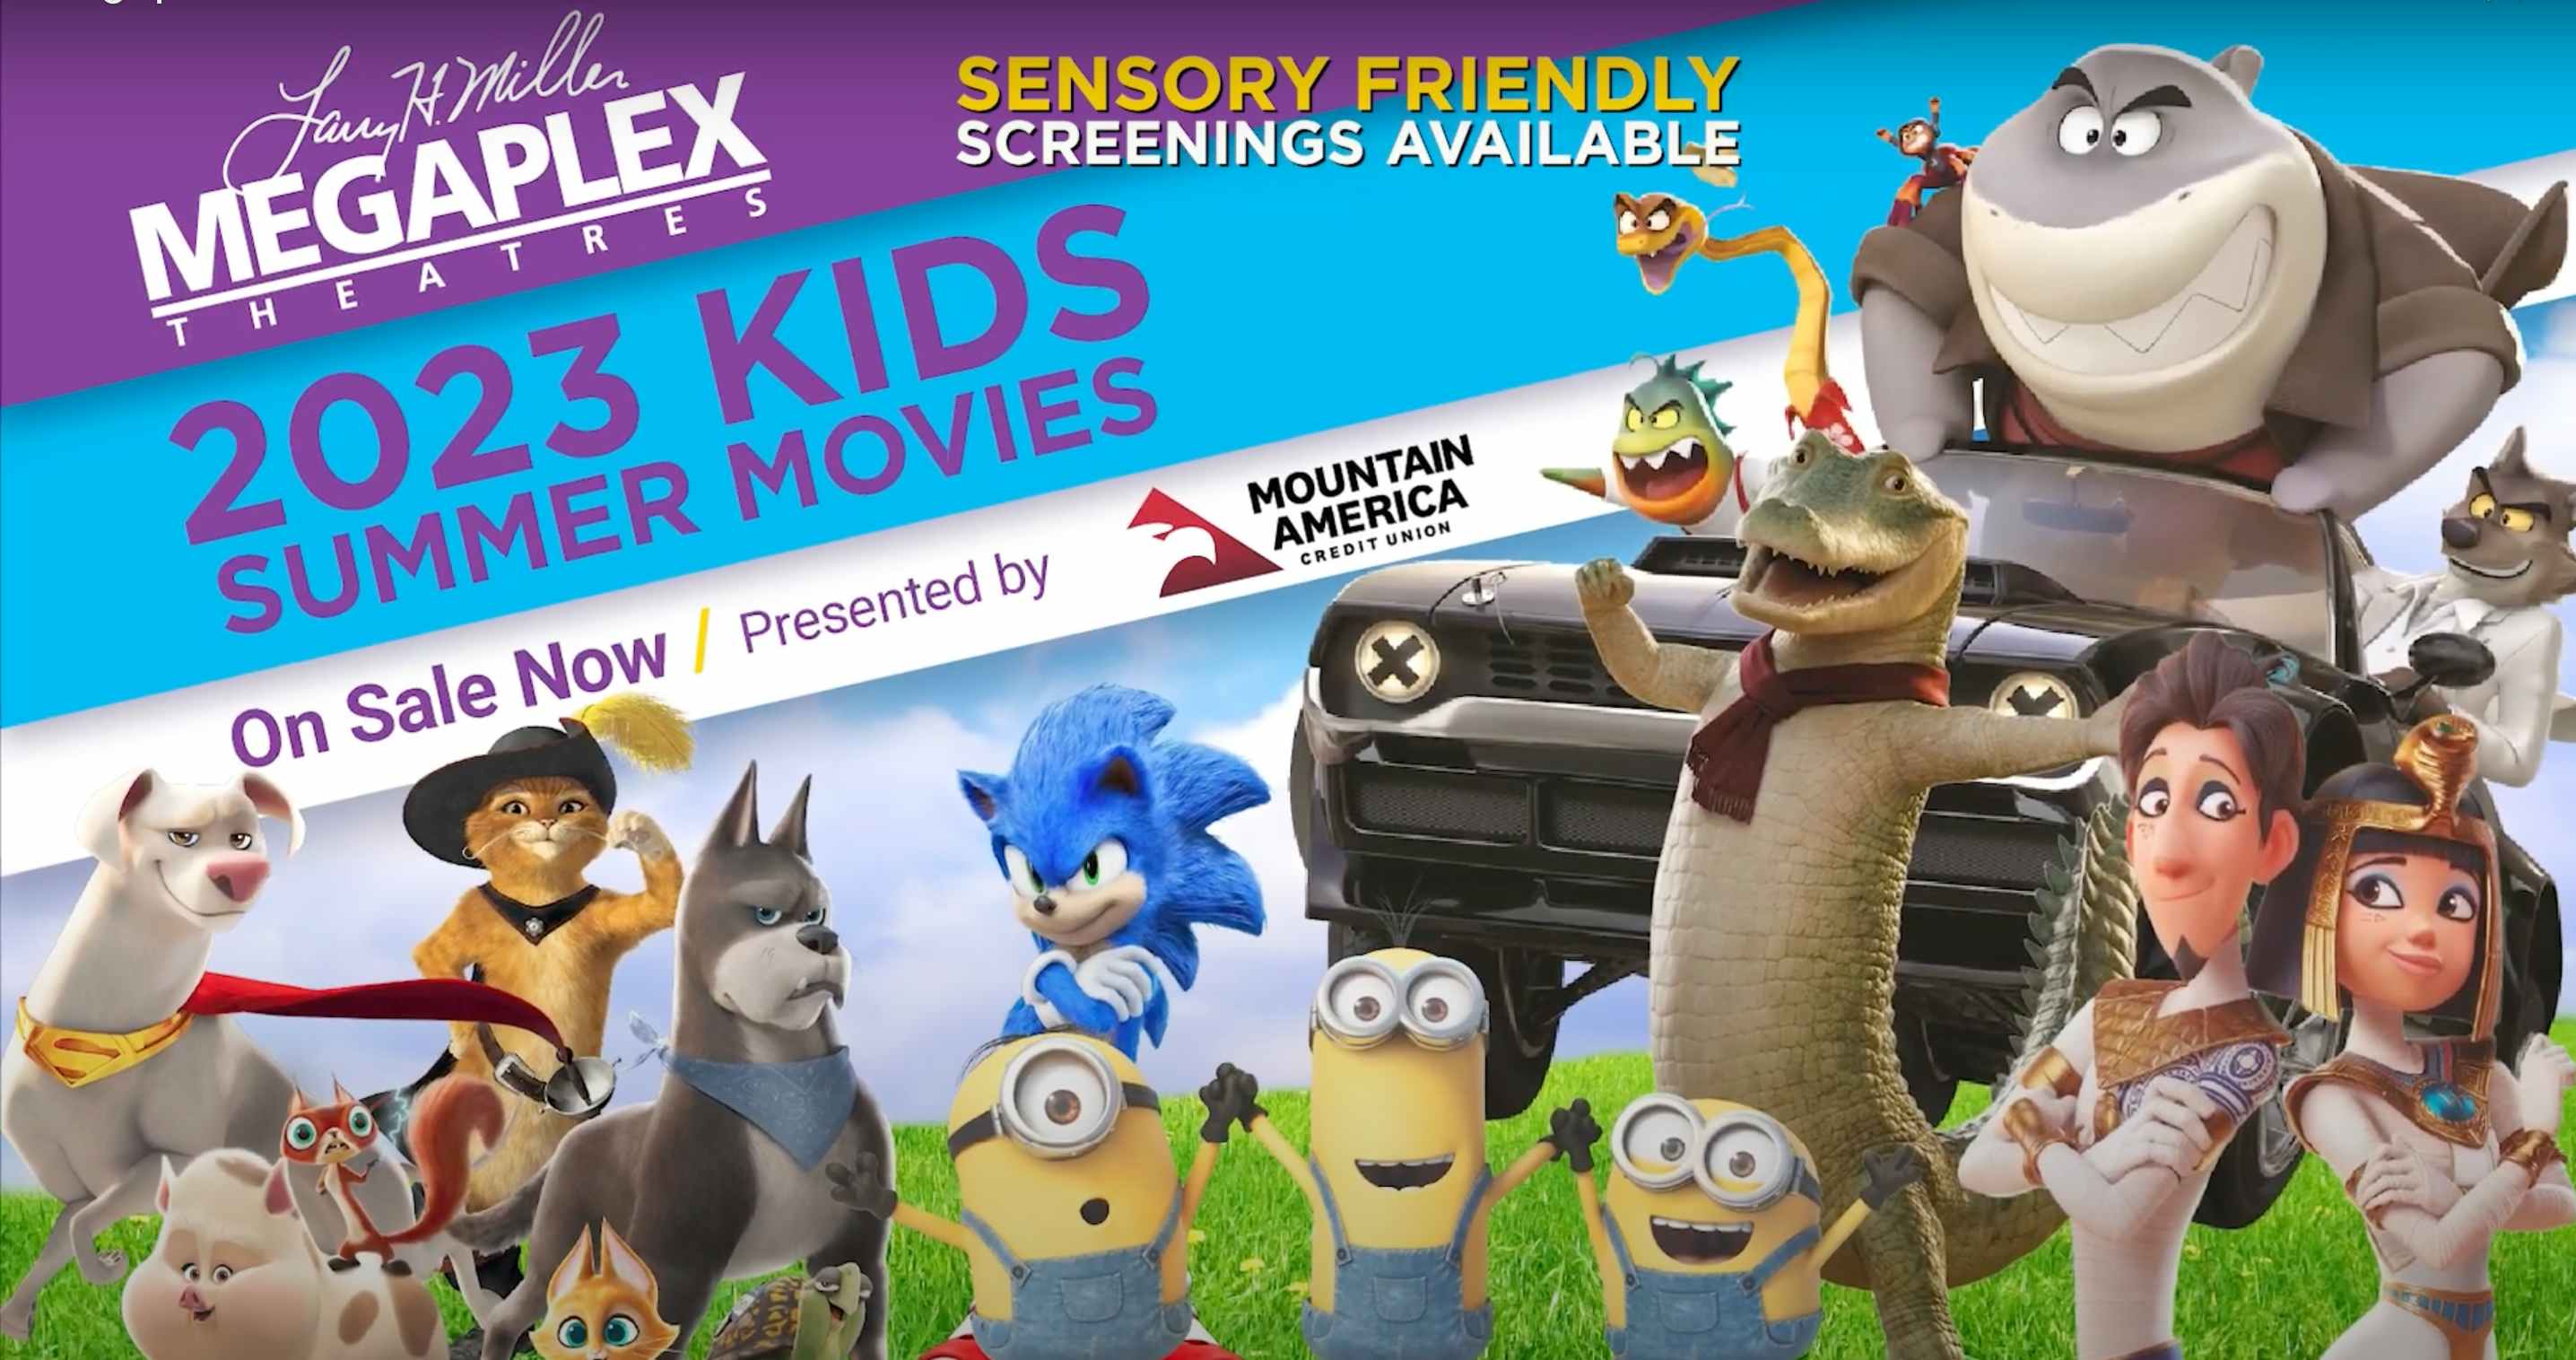 A banner for Summer Kid movies offering from Megaplex